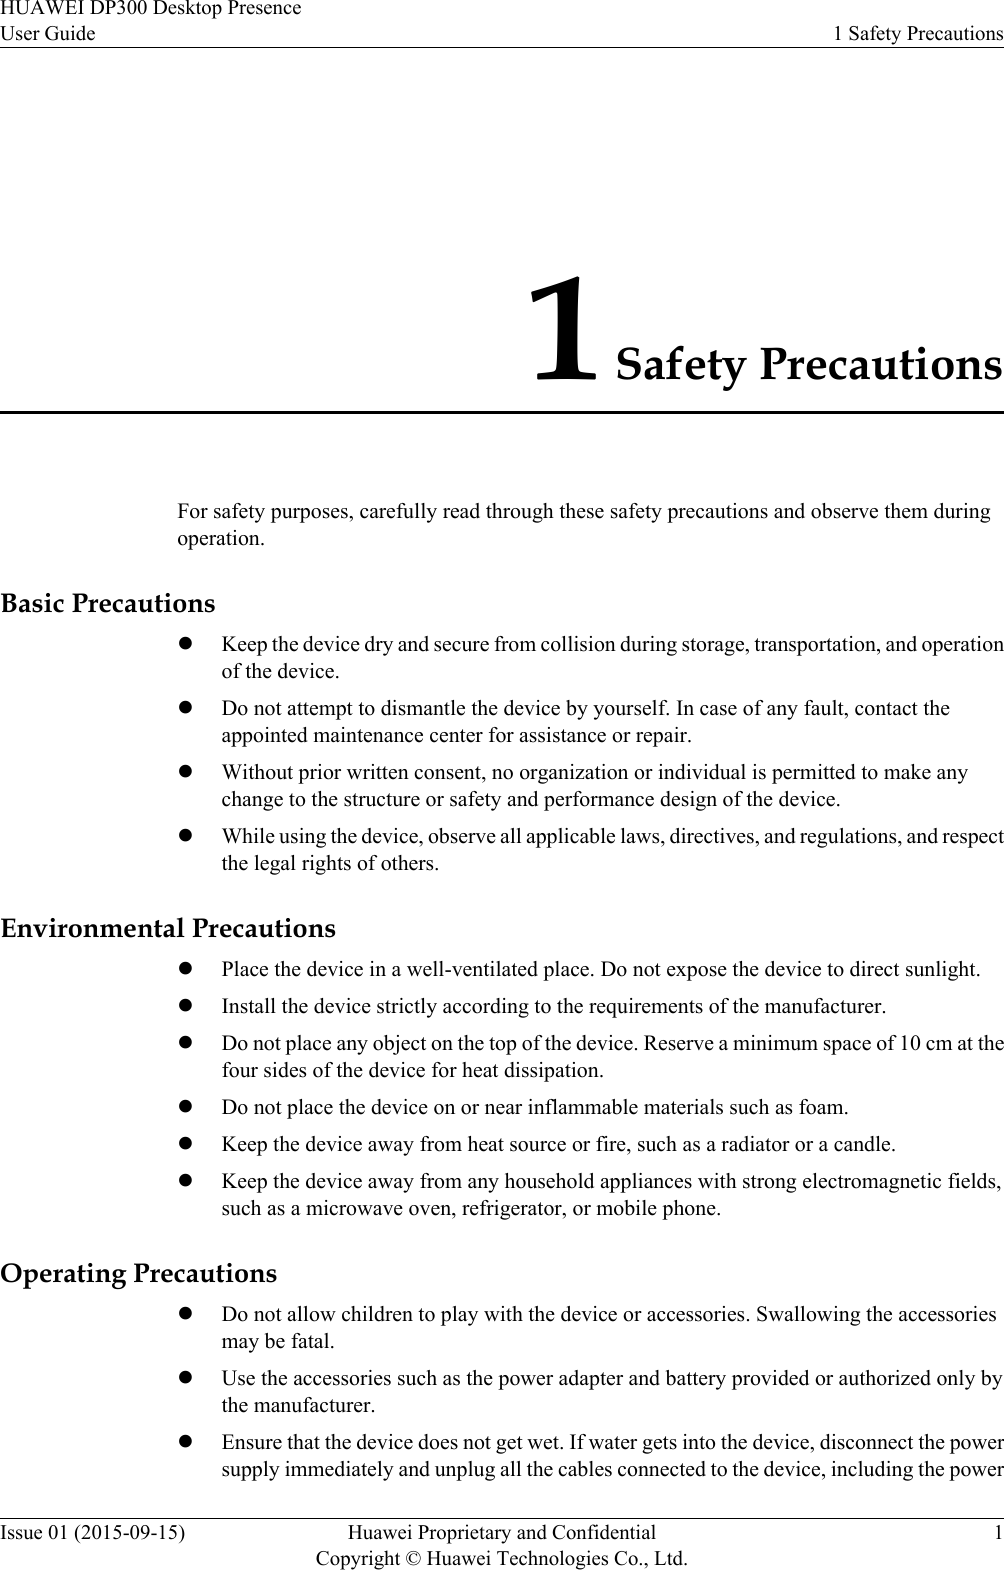 1 Safety PrecautionsFor safety purposes, carefully read through these safety precautions and observe them duringoperation.Basic PrecautionslKeep the device dry and secure from collision during storage, transportation, and operationof the device.lDo not attempt to dismantle the device by yourself. In case of any fault, contact theappointed maintenance center for assistance or repair.lWithout prior written consent, no organization or individual is permitted to make anychange to the structure or safety and performance design of the device.lWhile using the device, observe all applicable laws, directives, and regulations, and respectthe legal rights of others.Environmental PrecautionslPlace the device in a well-ventilated place. Do not expose the device to direct sunlight.lInstall the device strictly according to the requirements of the manufacturer.lDo not place any object on the top of the device. Reserve a minimum space of 10 cm at thefour sides of the device for heat dissipation.lDo not place the device on or near inflammable materials such as foam.lKeep the device away from heat source or fire, such as a radiator or a candle.lKeep the device away from any household appliances with strong electromagnetic fields,such as a microwave oven, refrigerator, or mobile phone.Operating PrecautionslDo not allow children to play with the device or accessories. Swallowing the accessoriesmay be fatal.lUse the accessories such as the power adapter and battery provided or authorized only bythe manufacturer.lEnsure that the device does not get wet. If water gets into the device, disconnect the powersupply immediately and unplug all the cables connected to the device, including the powerHUAWEI DP300 Desktop PresenceUser Guide 1 Safety PrecautionsIssue 01 (2015-09-15) Huawei Proprietary and ConfidentialCopyright © Huawei Technologies Co., Ltd.1